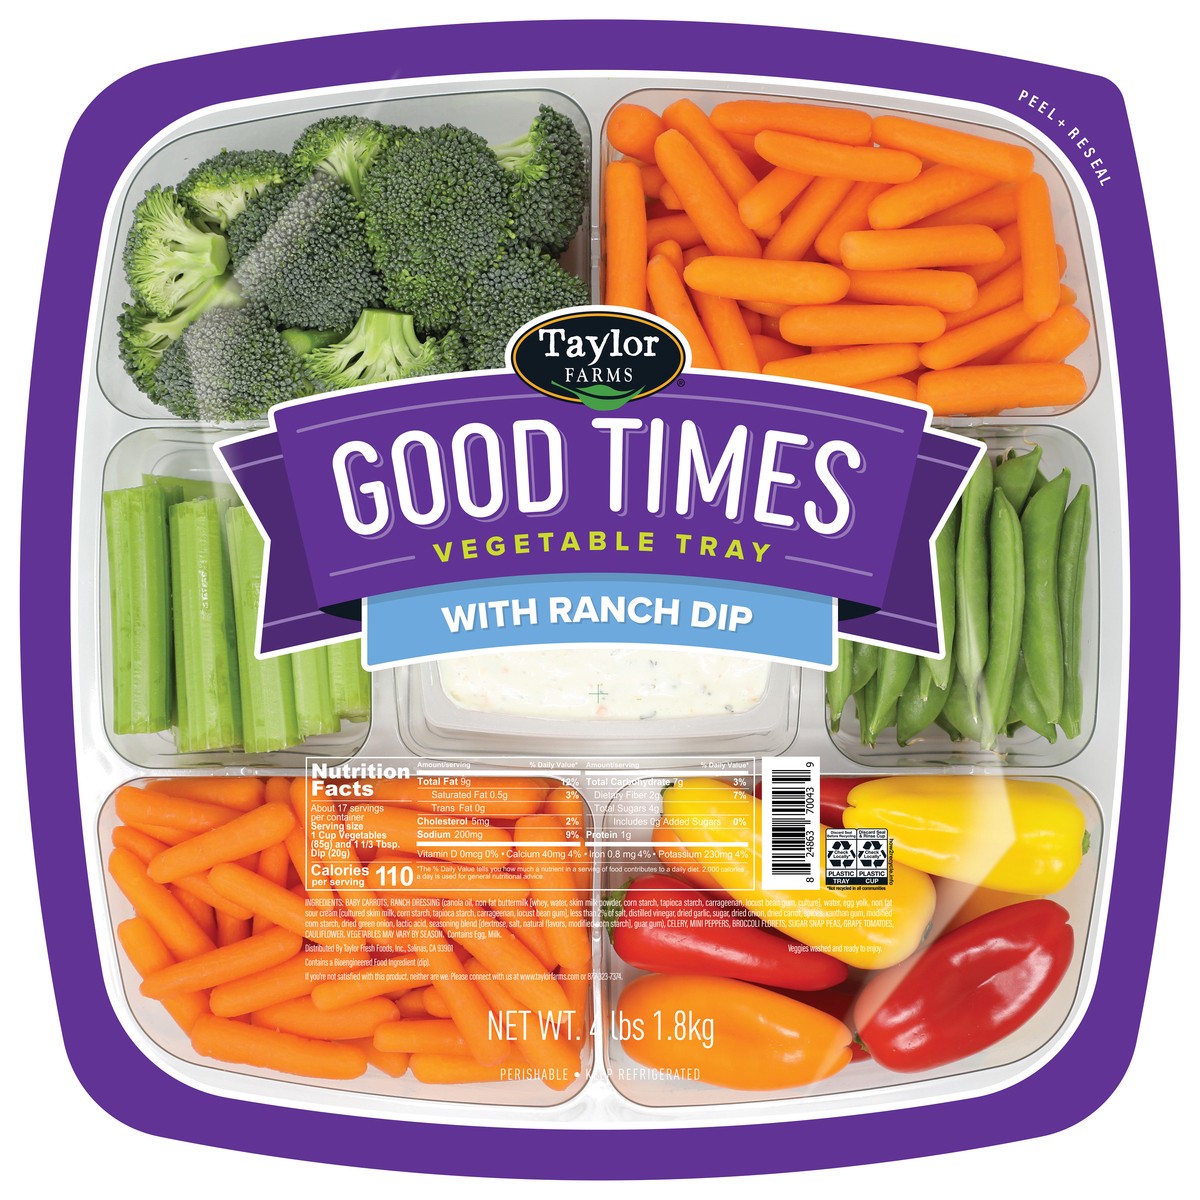 slide 1 of 3, Taylor Farms Good Times Vegetable Tray with Ranch Dip 4 lb, 4 lb